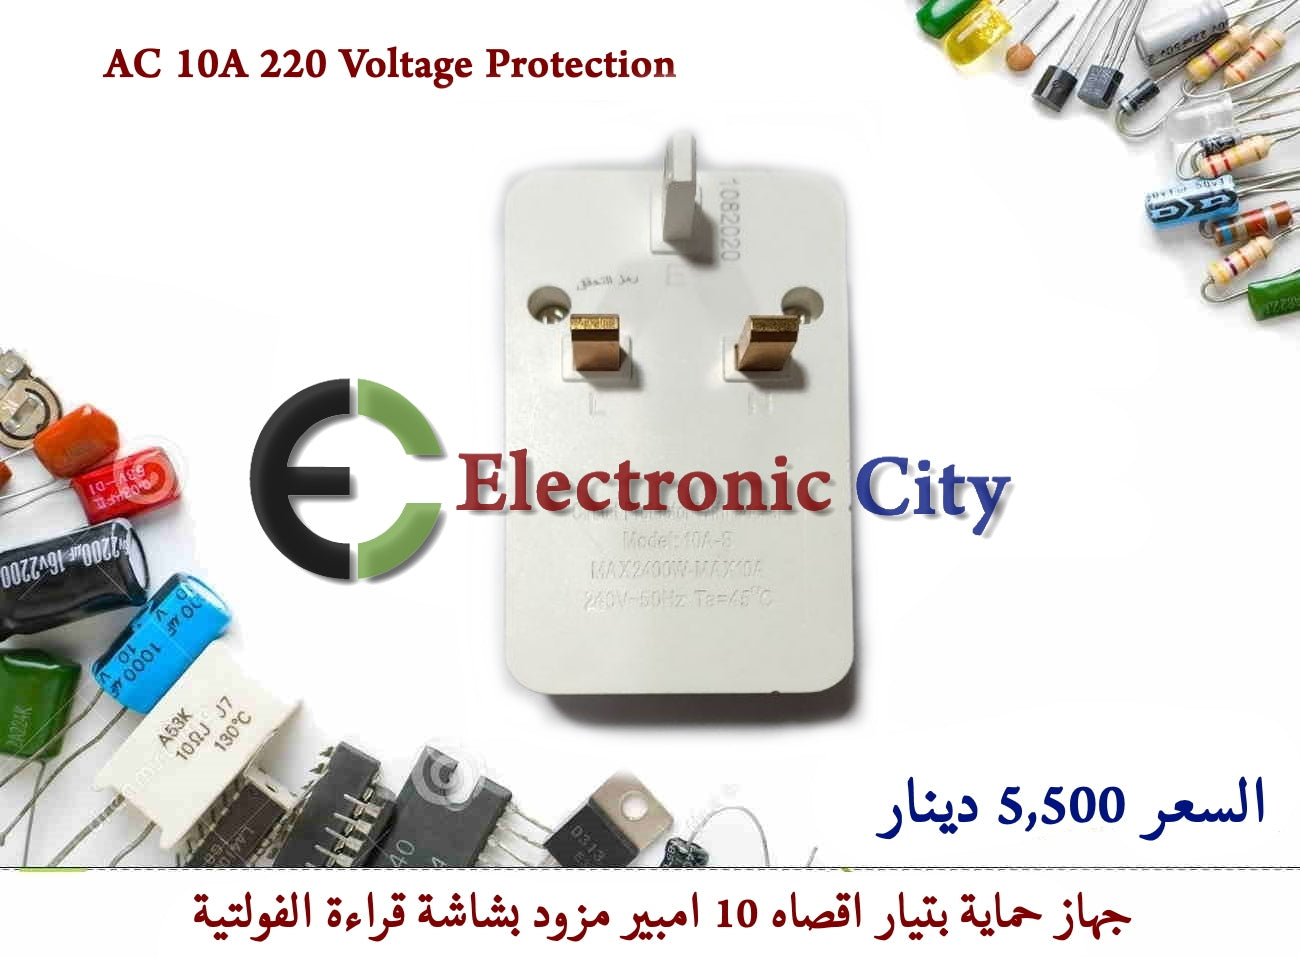 AC 10A 220 Voltage Protection